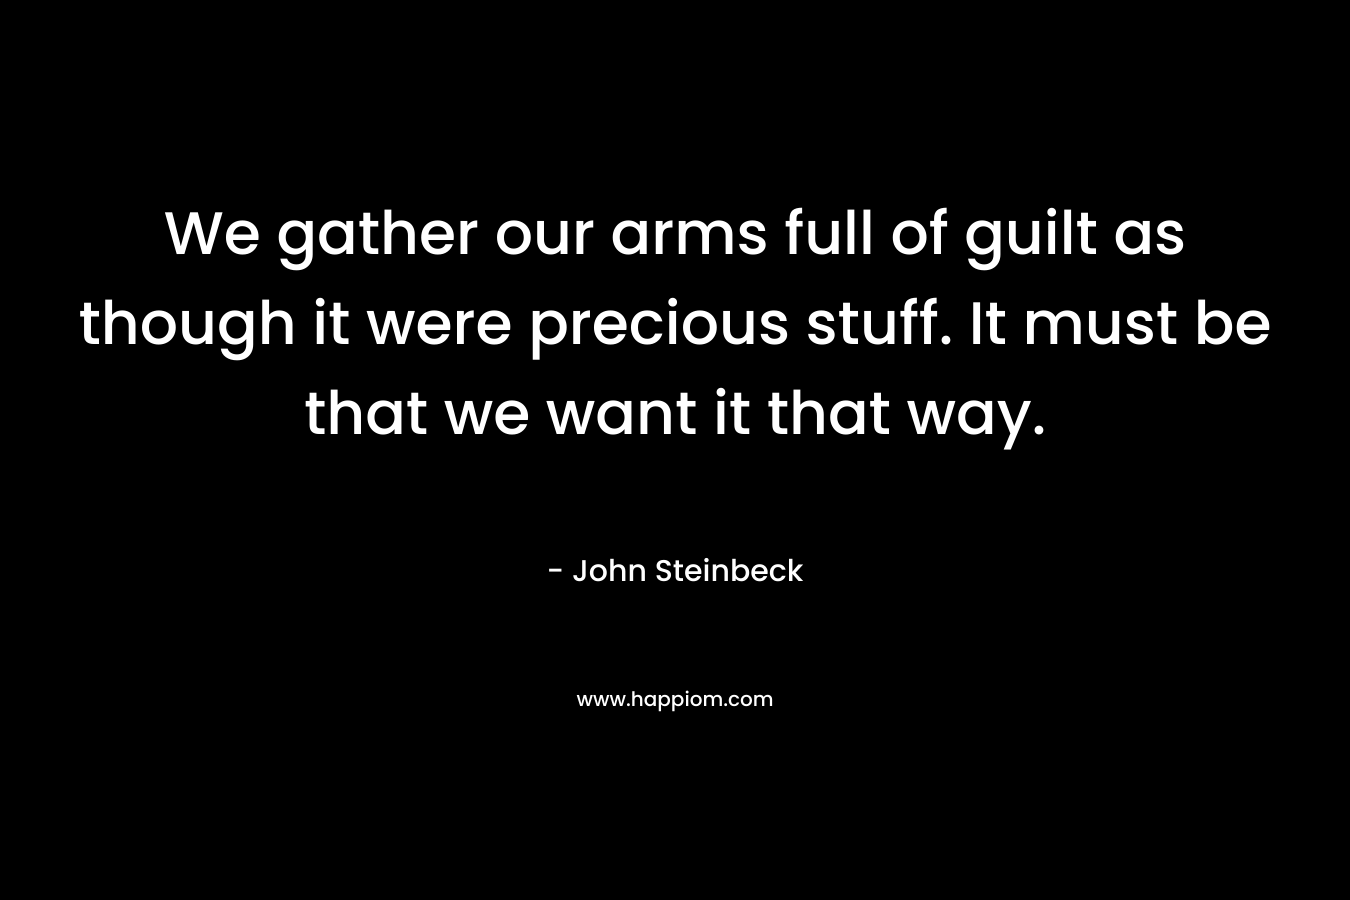 We gather our arms full of guilt as though it were precious stuff. It must be that we want it that way. – John Steinbeck